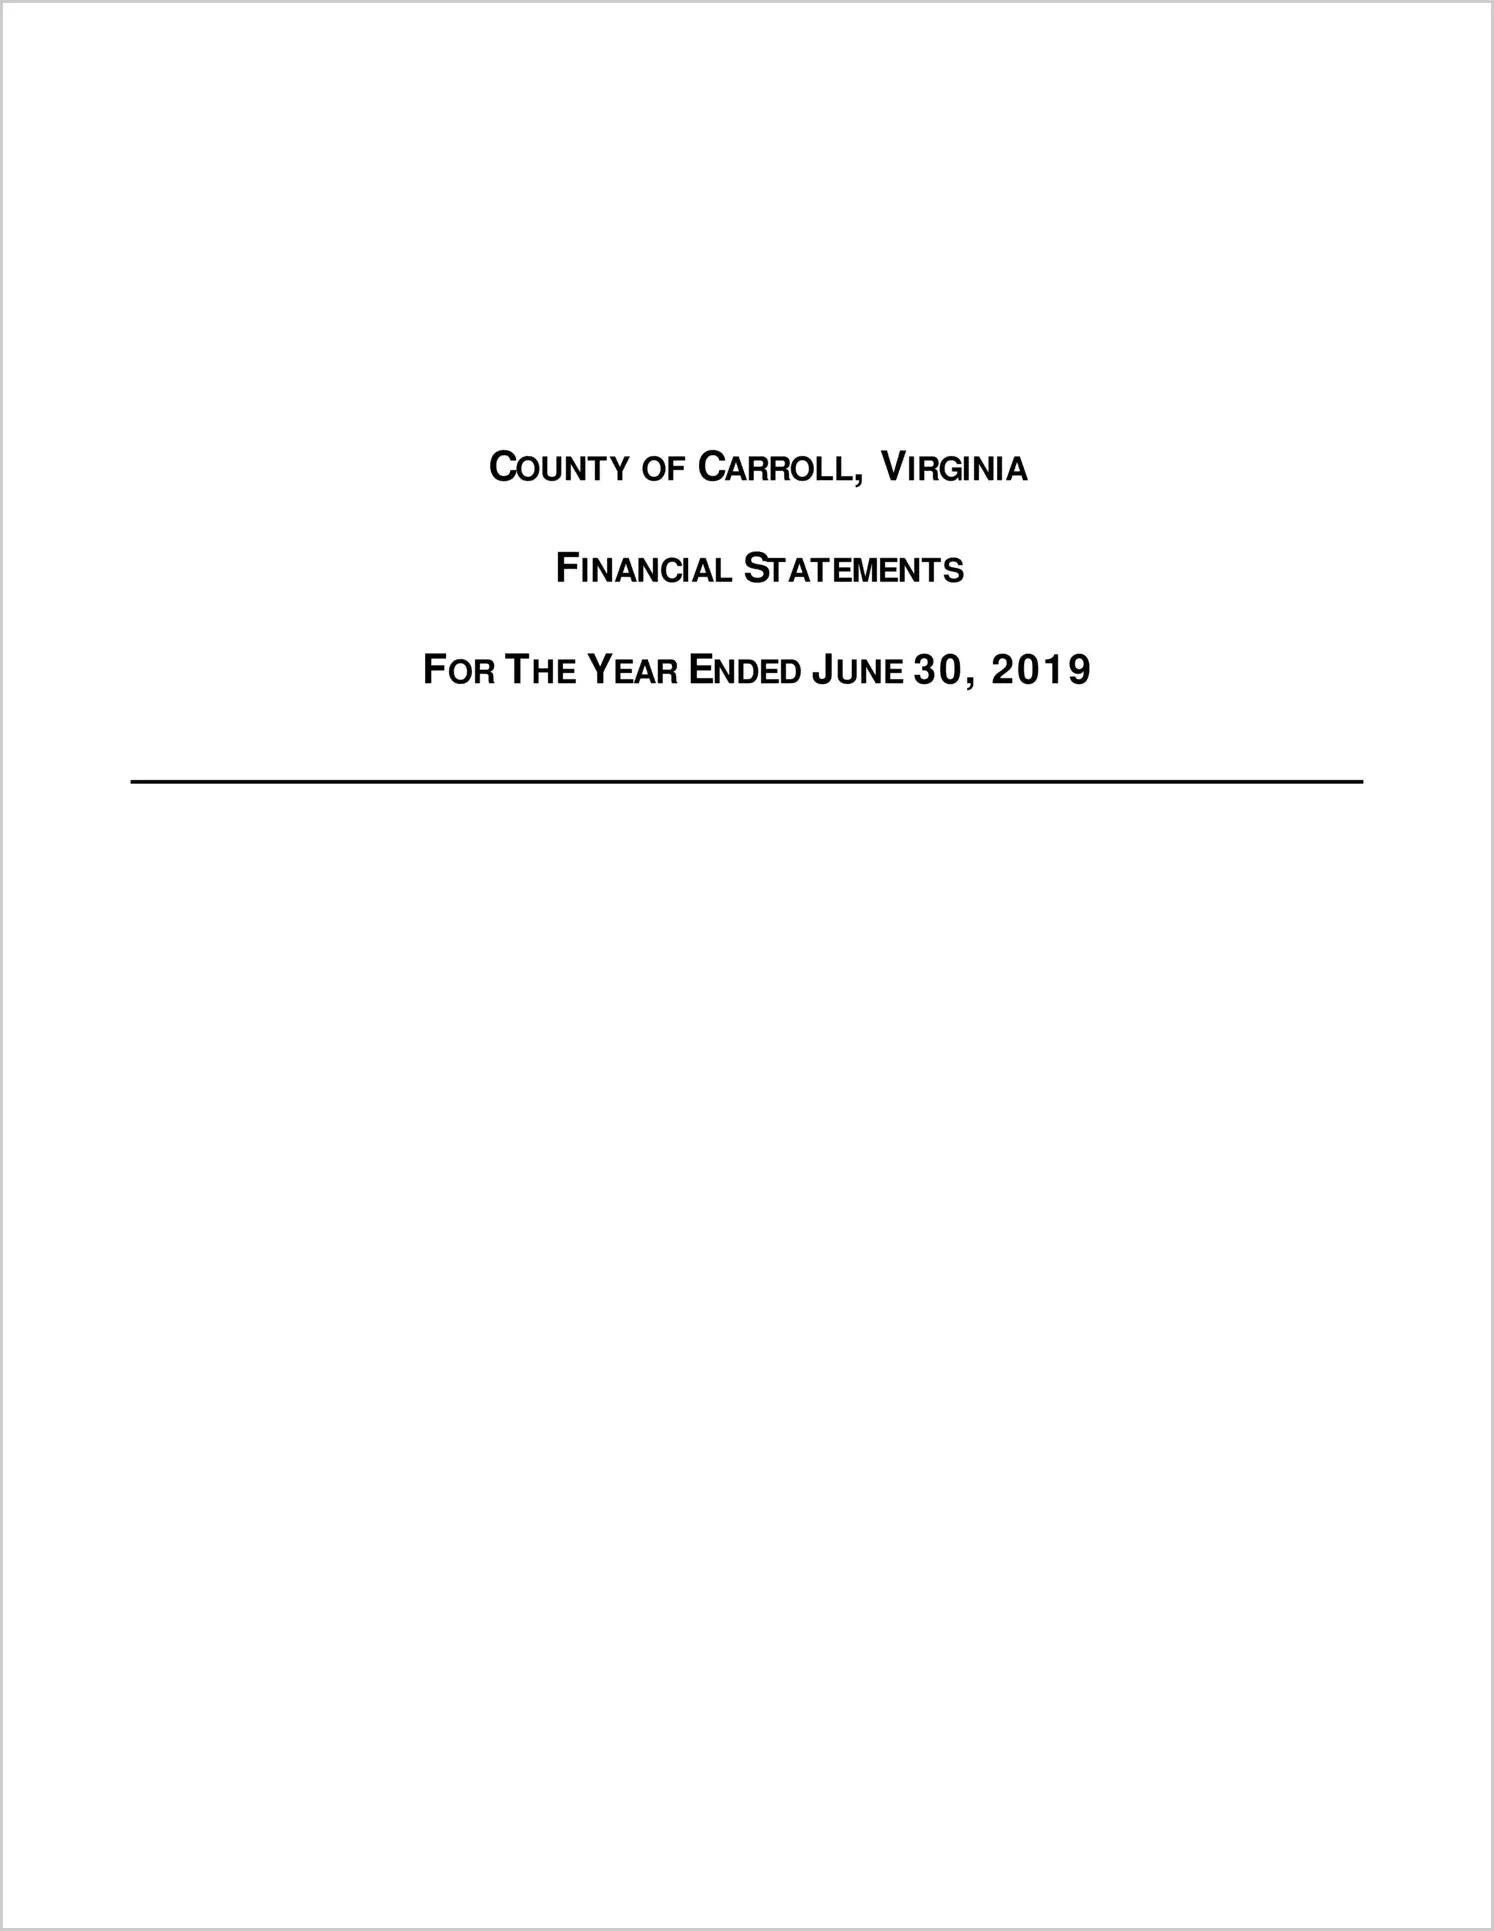 2019 Annual Financial Report for County of Carroll